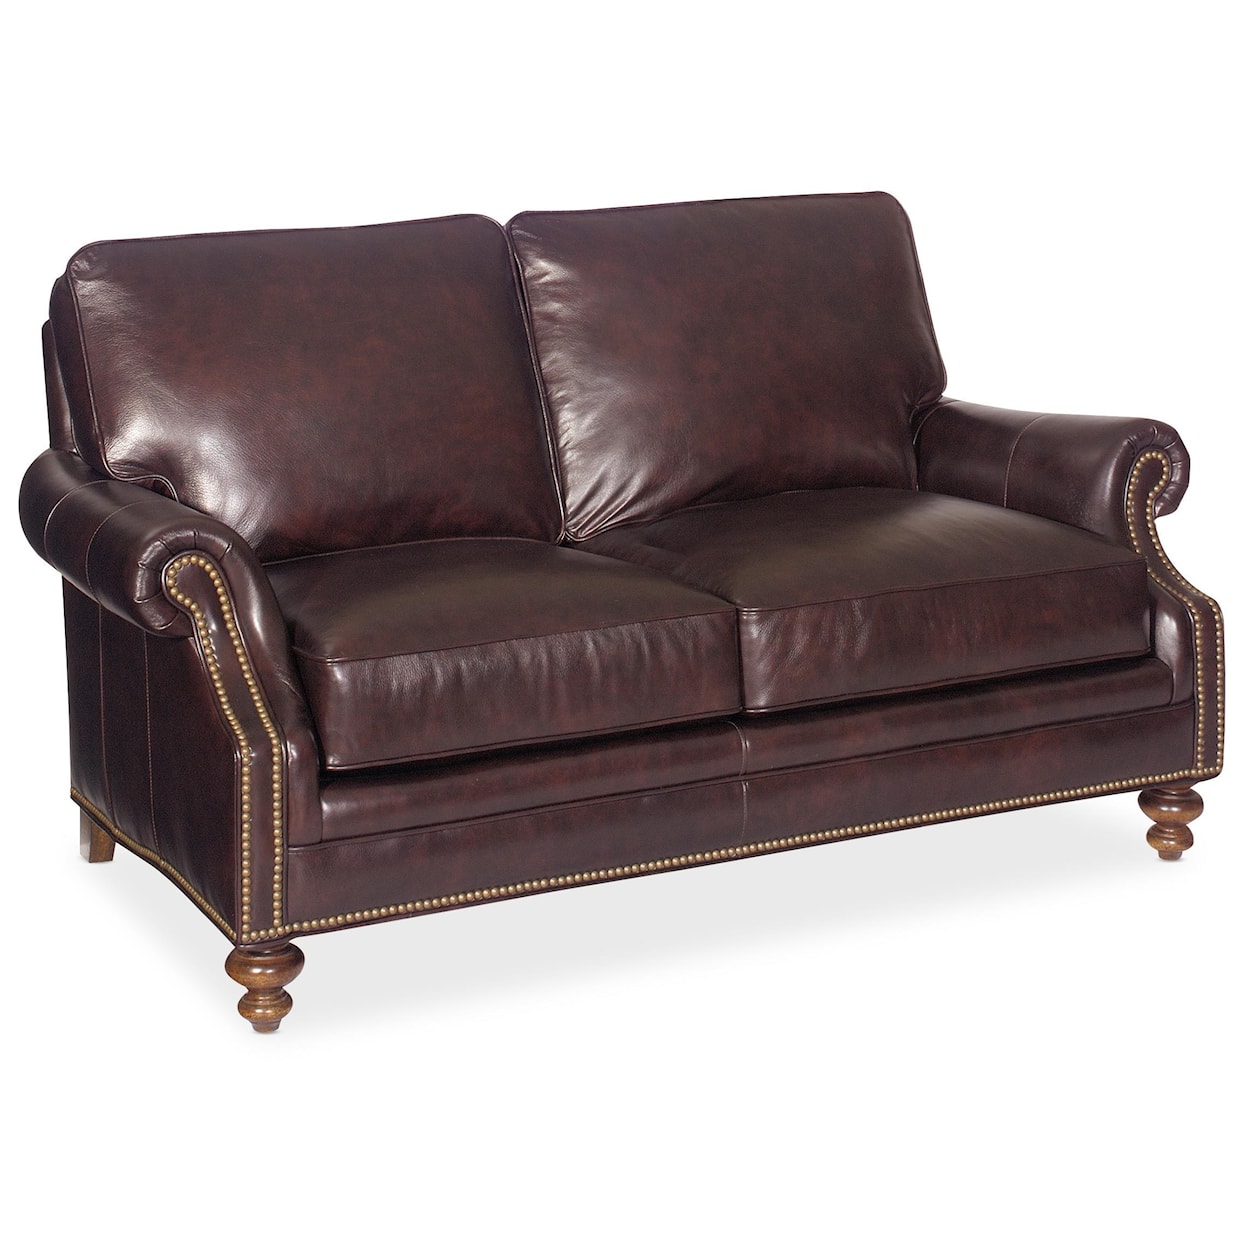 Bradington Young West Haven 759  West Haven Stationary Loveseat